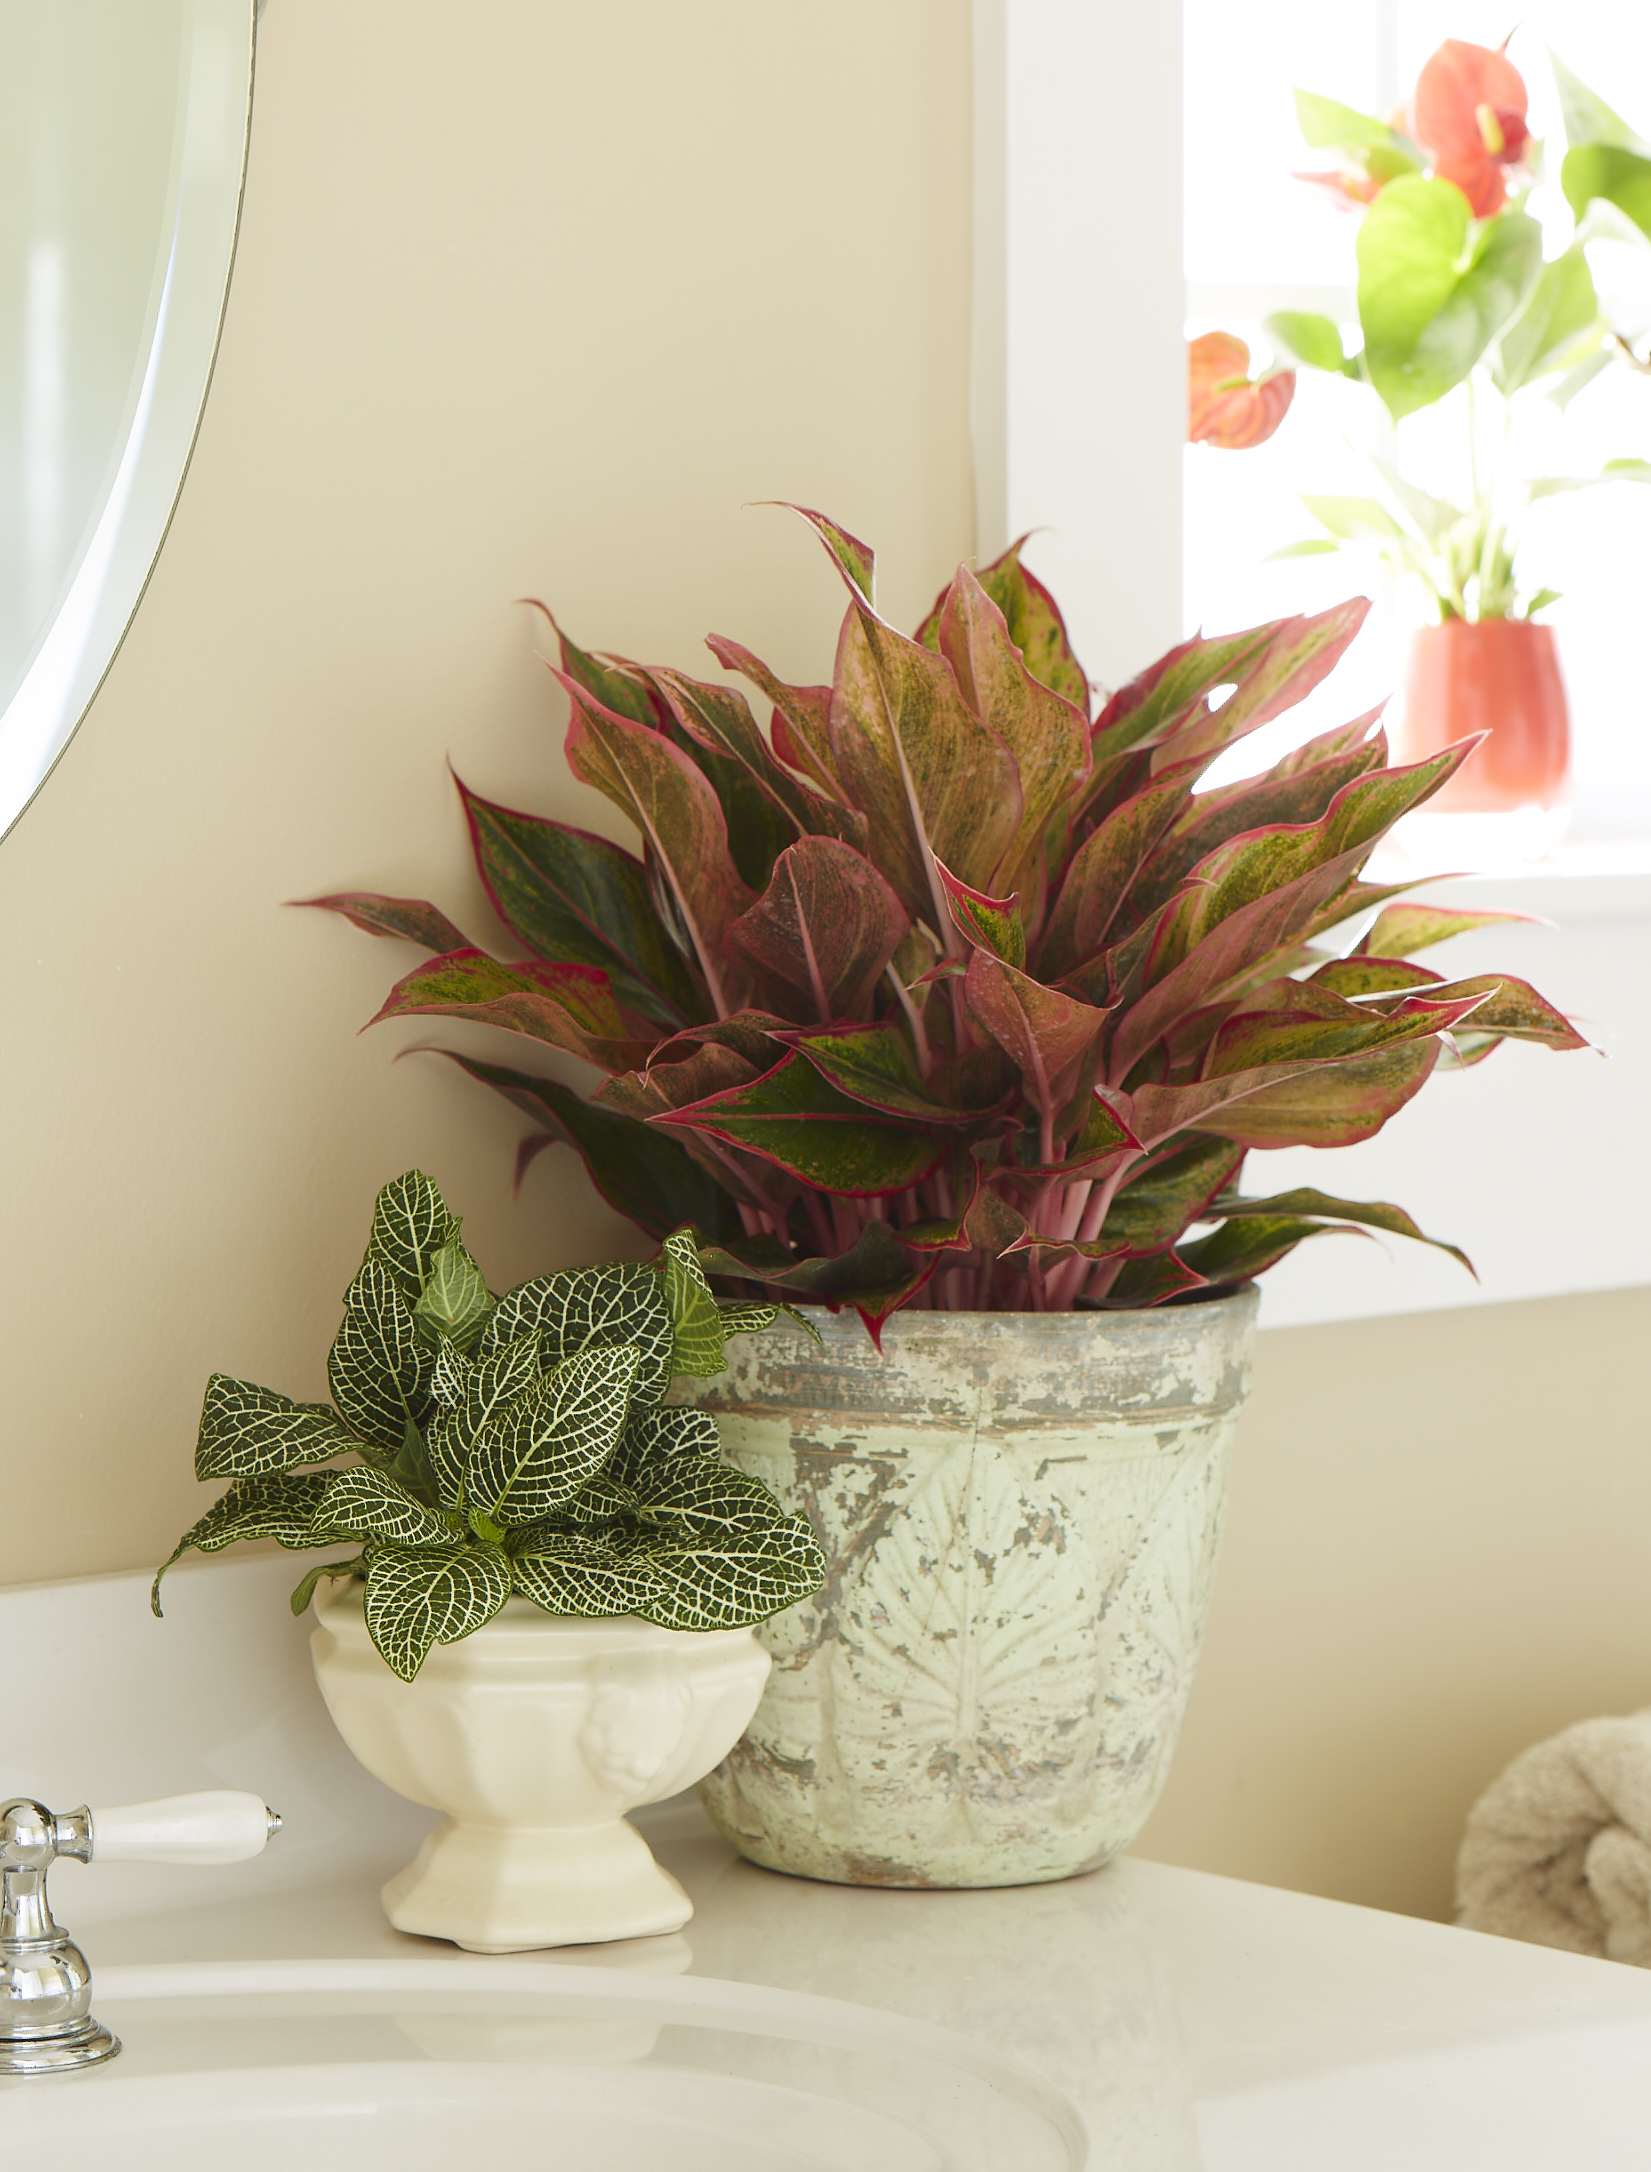 Costa Farms Shares Tips On Adding Houseplants For Winter Beauty